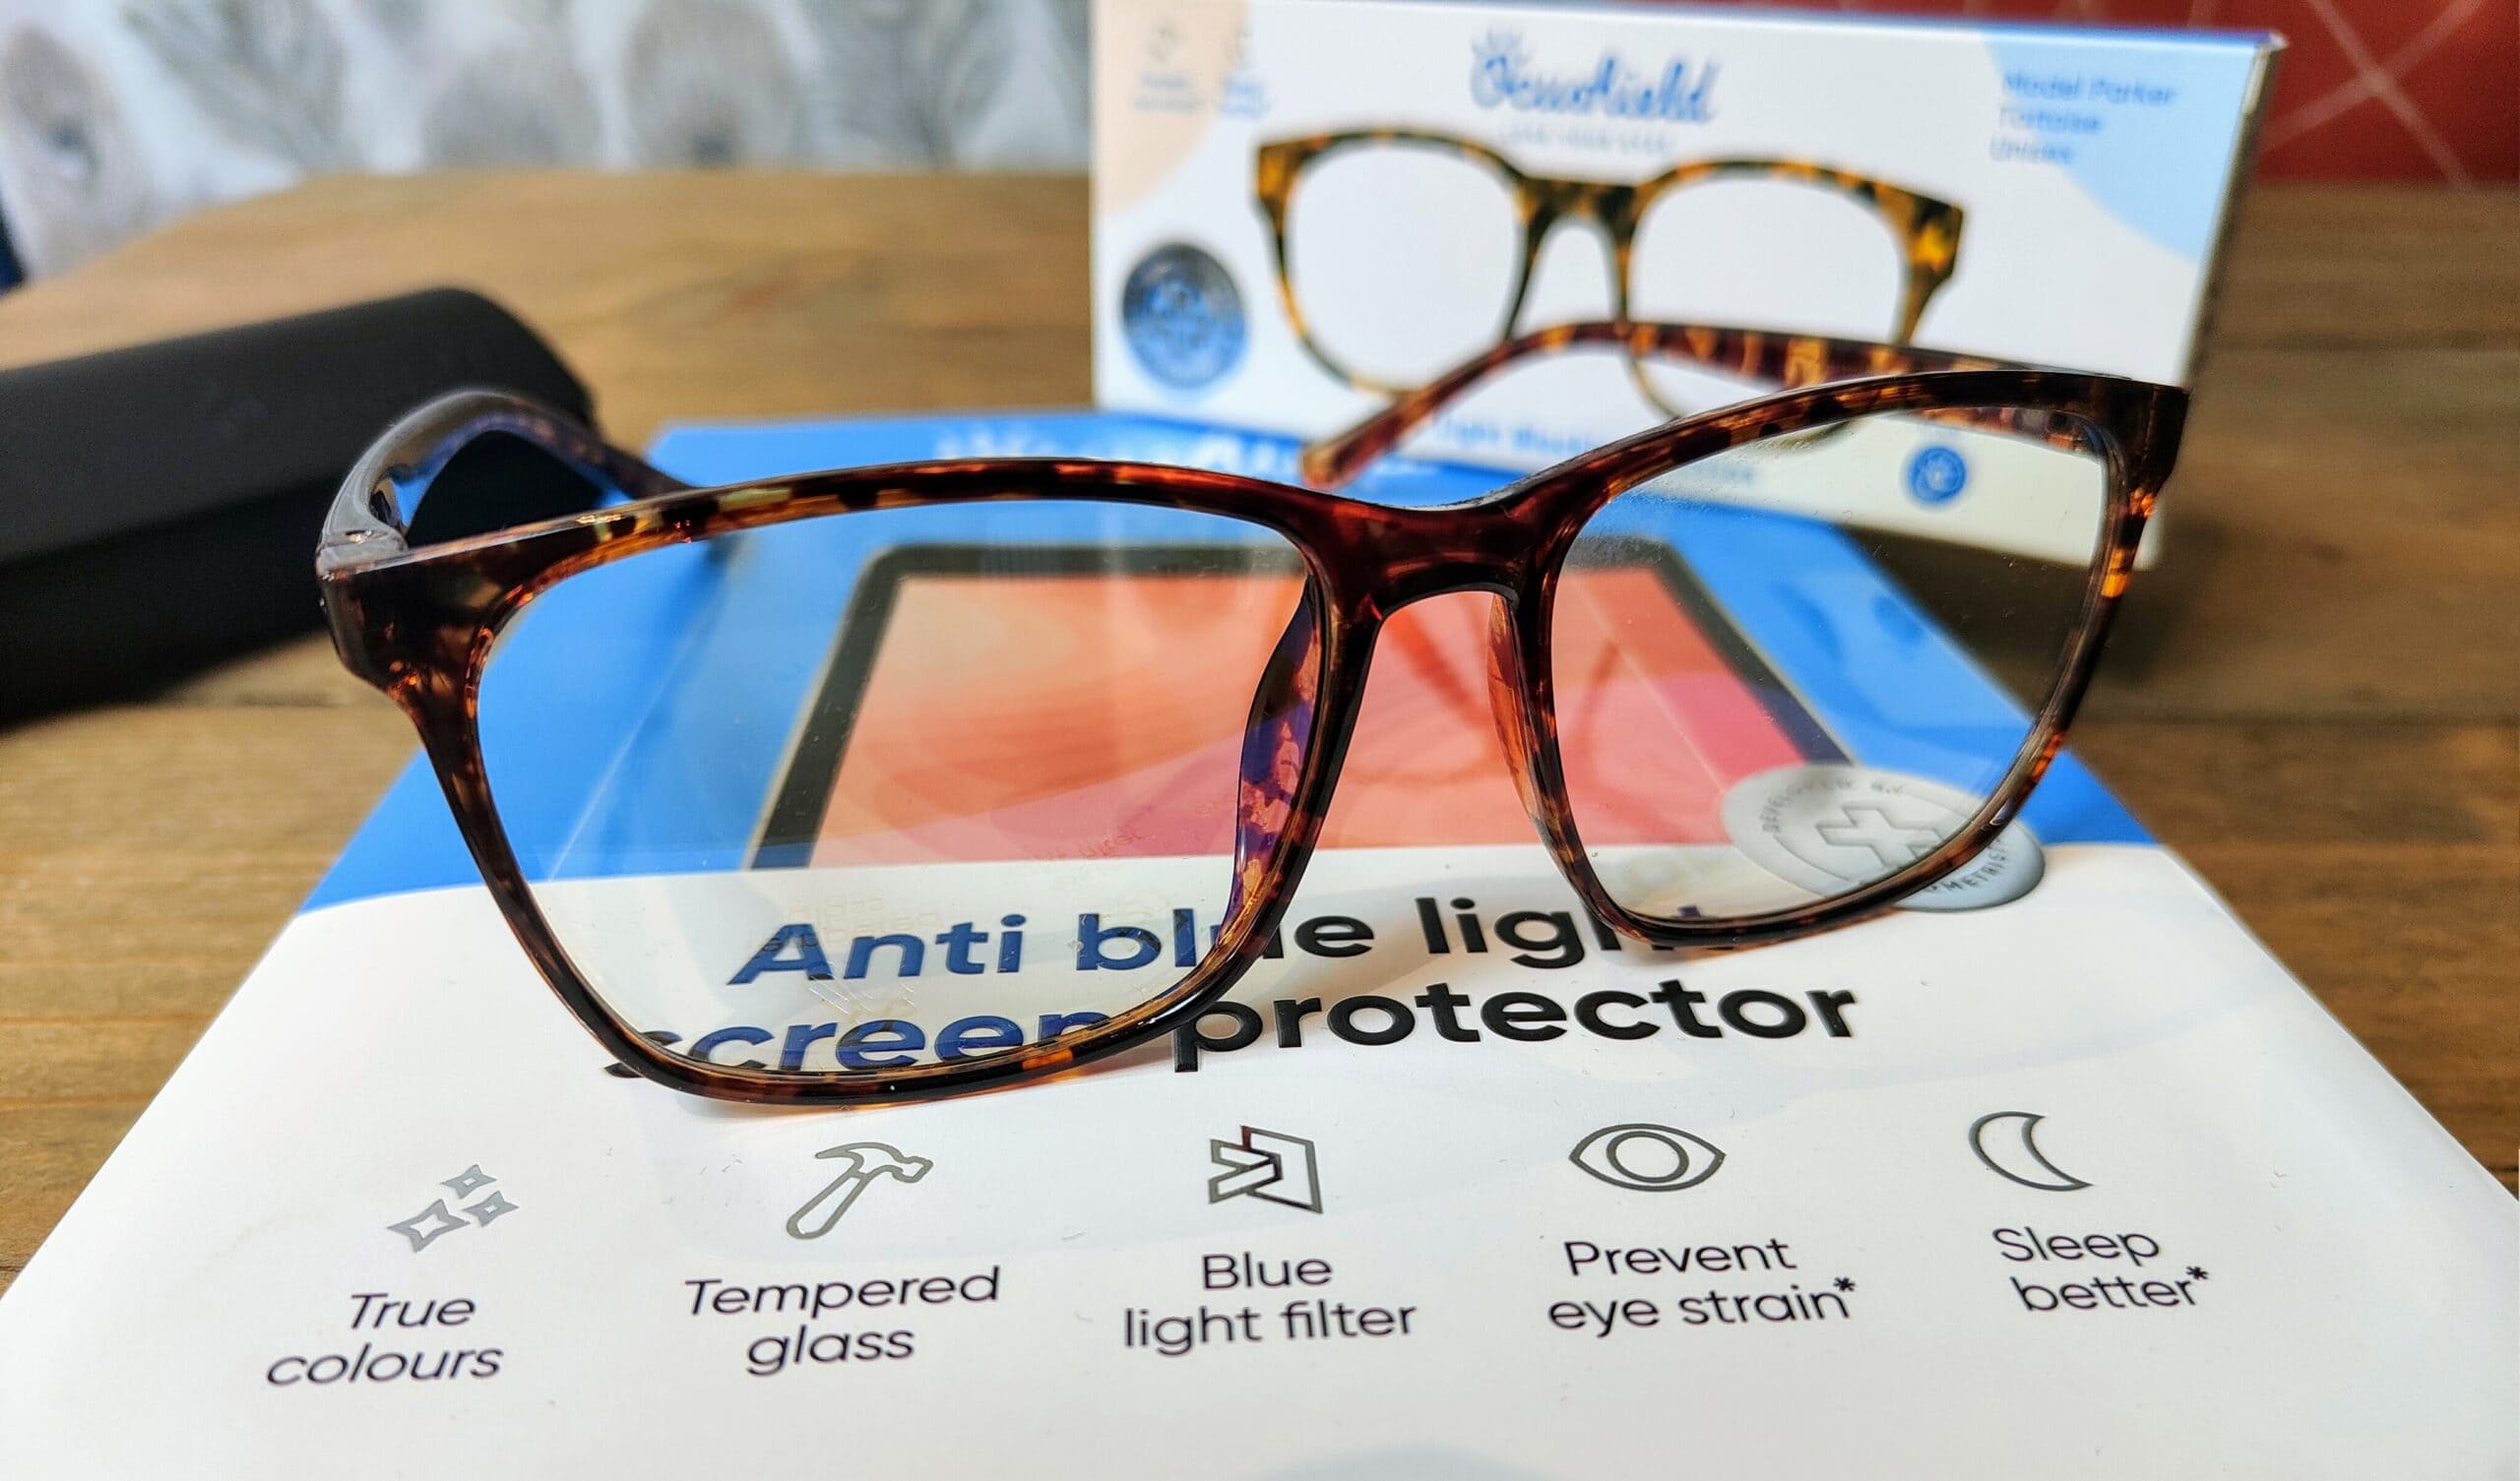 Ocushield Blue Light Filter Glasses & Screen Protector Review – Improve your sleep and reduce headaches by filtering out blue light